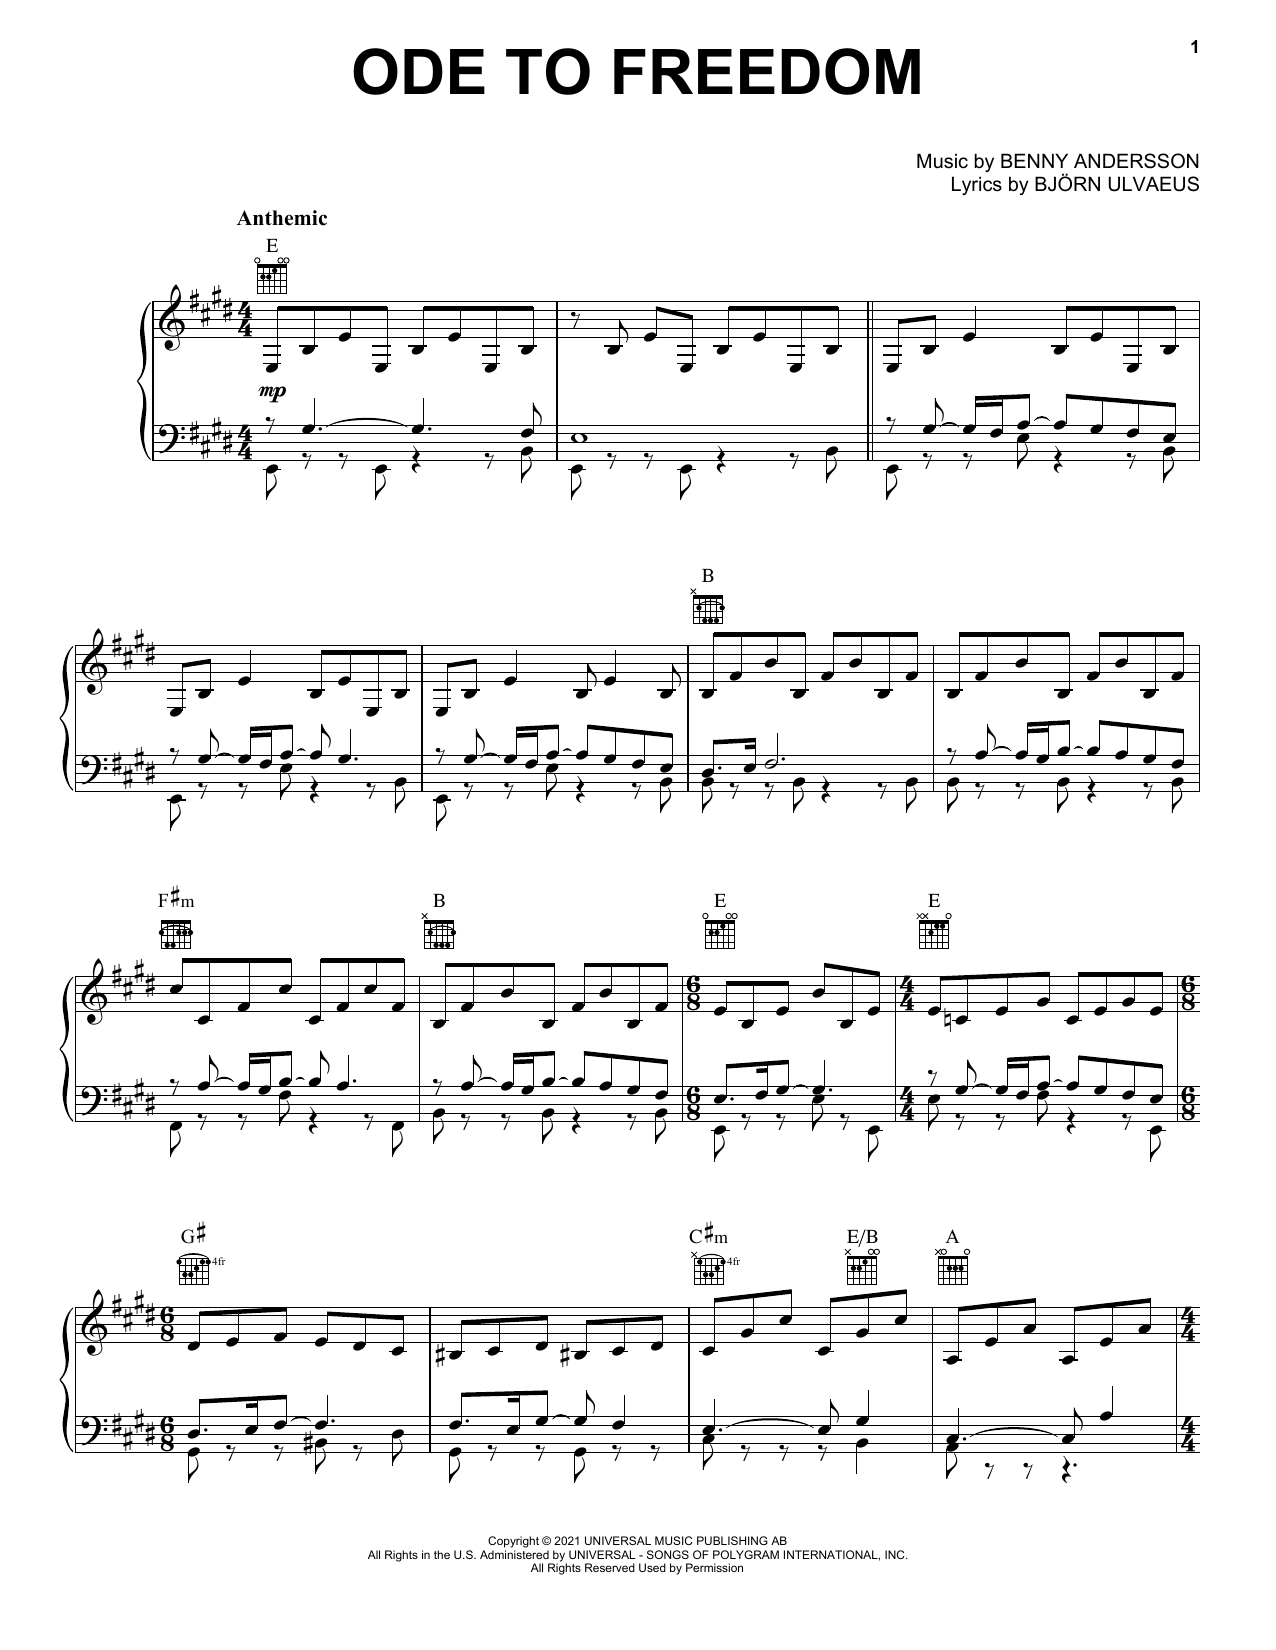 Download ABBA Ode To Freedom Sheet Music